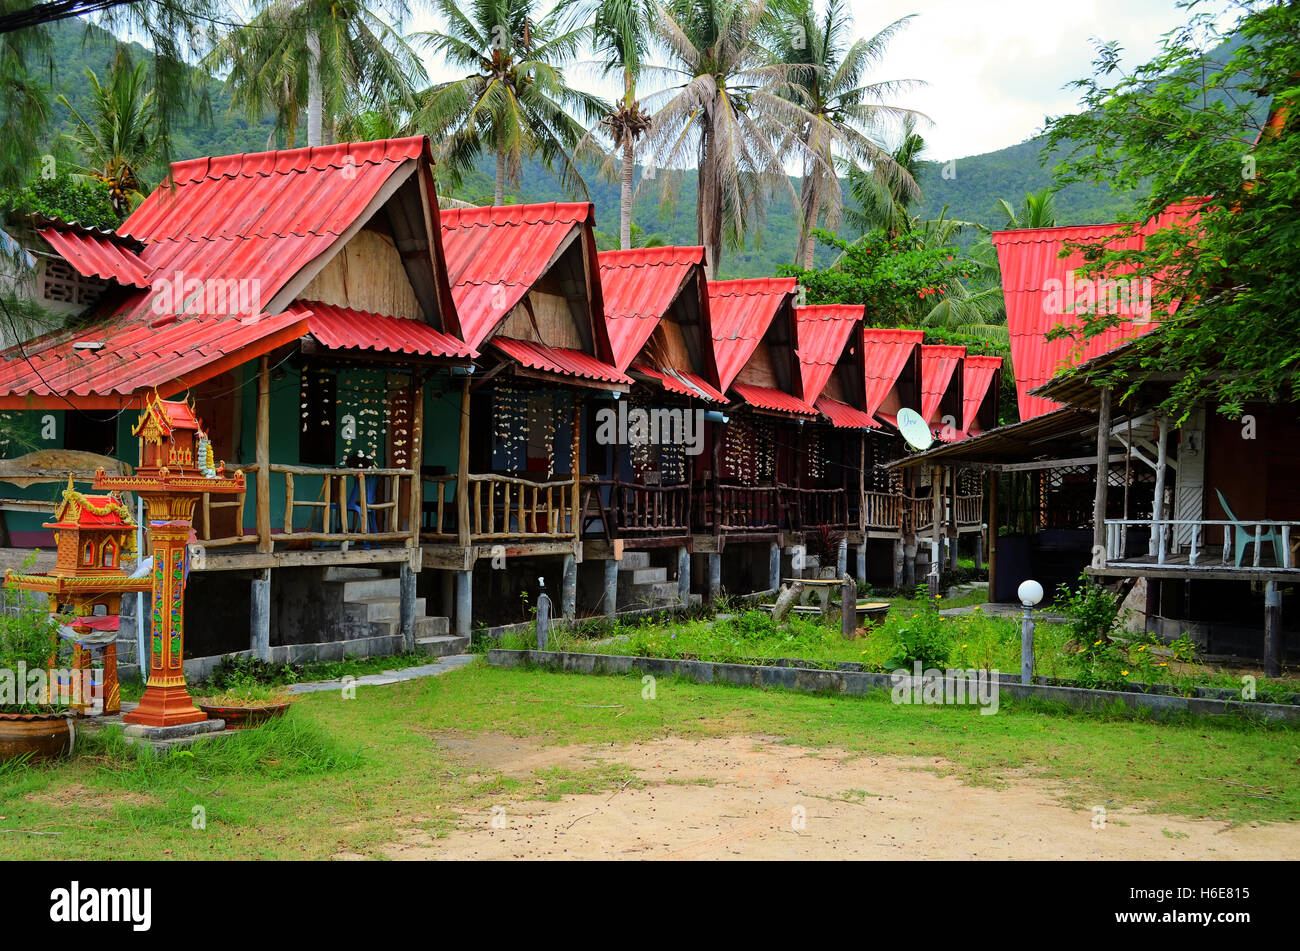 Koh Phangan, Thailand - August 30, 2014: Red roof bungalows in Chalok Lam Bay. Stock Photo